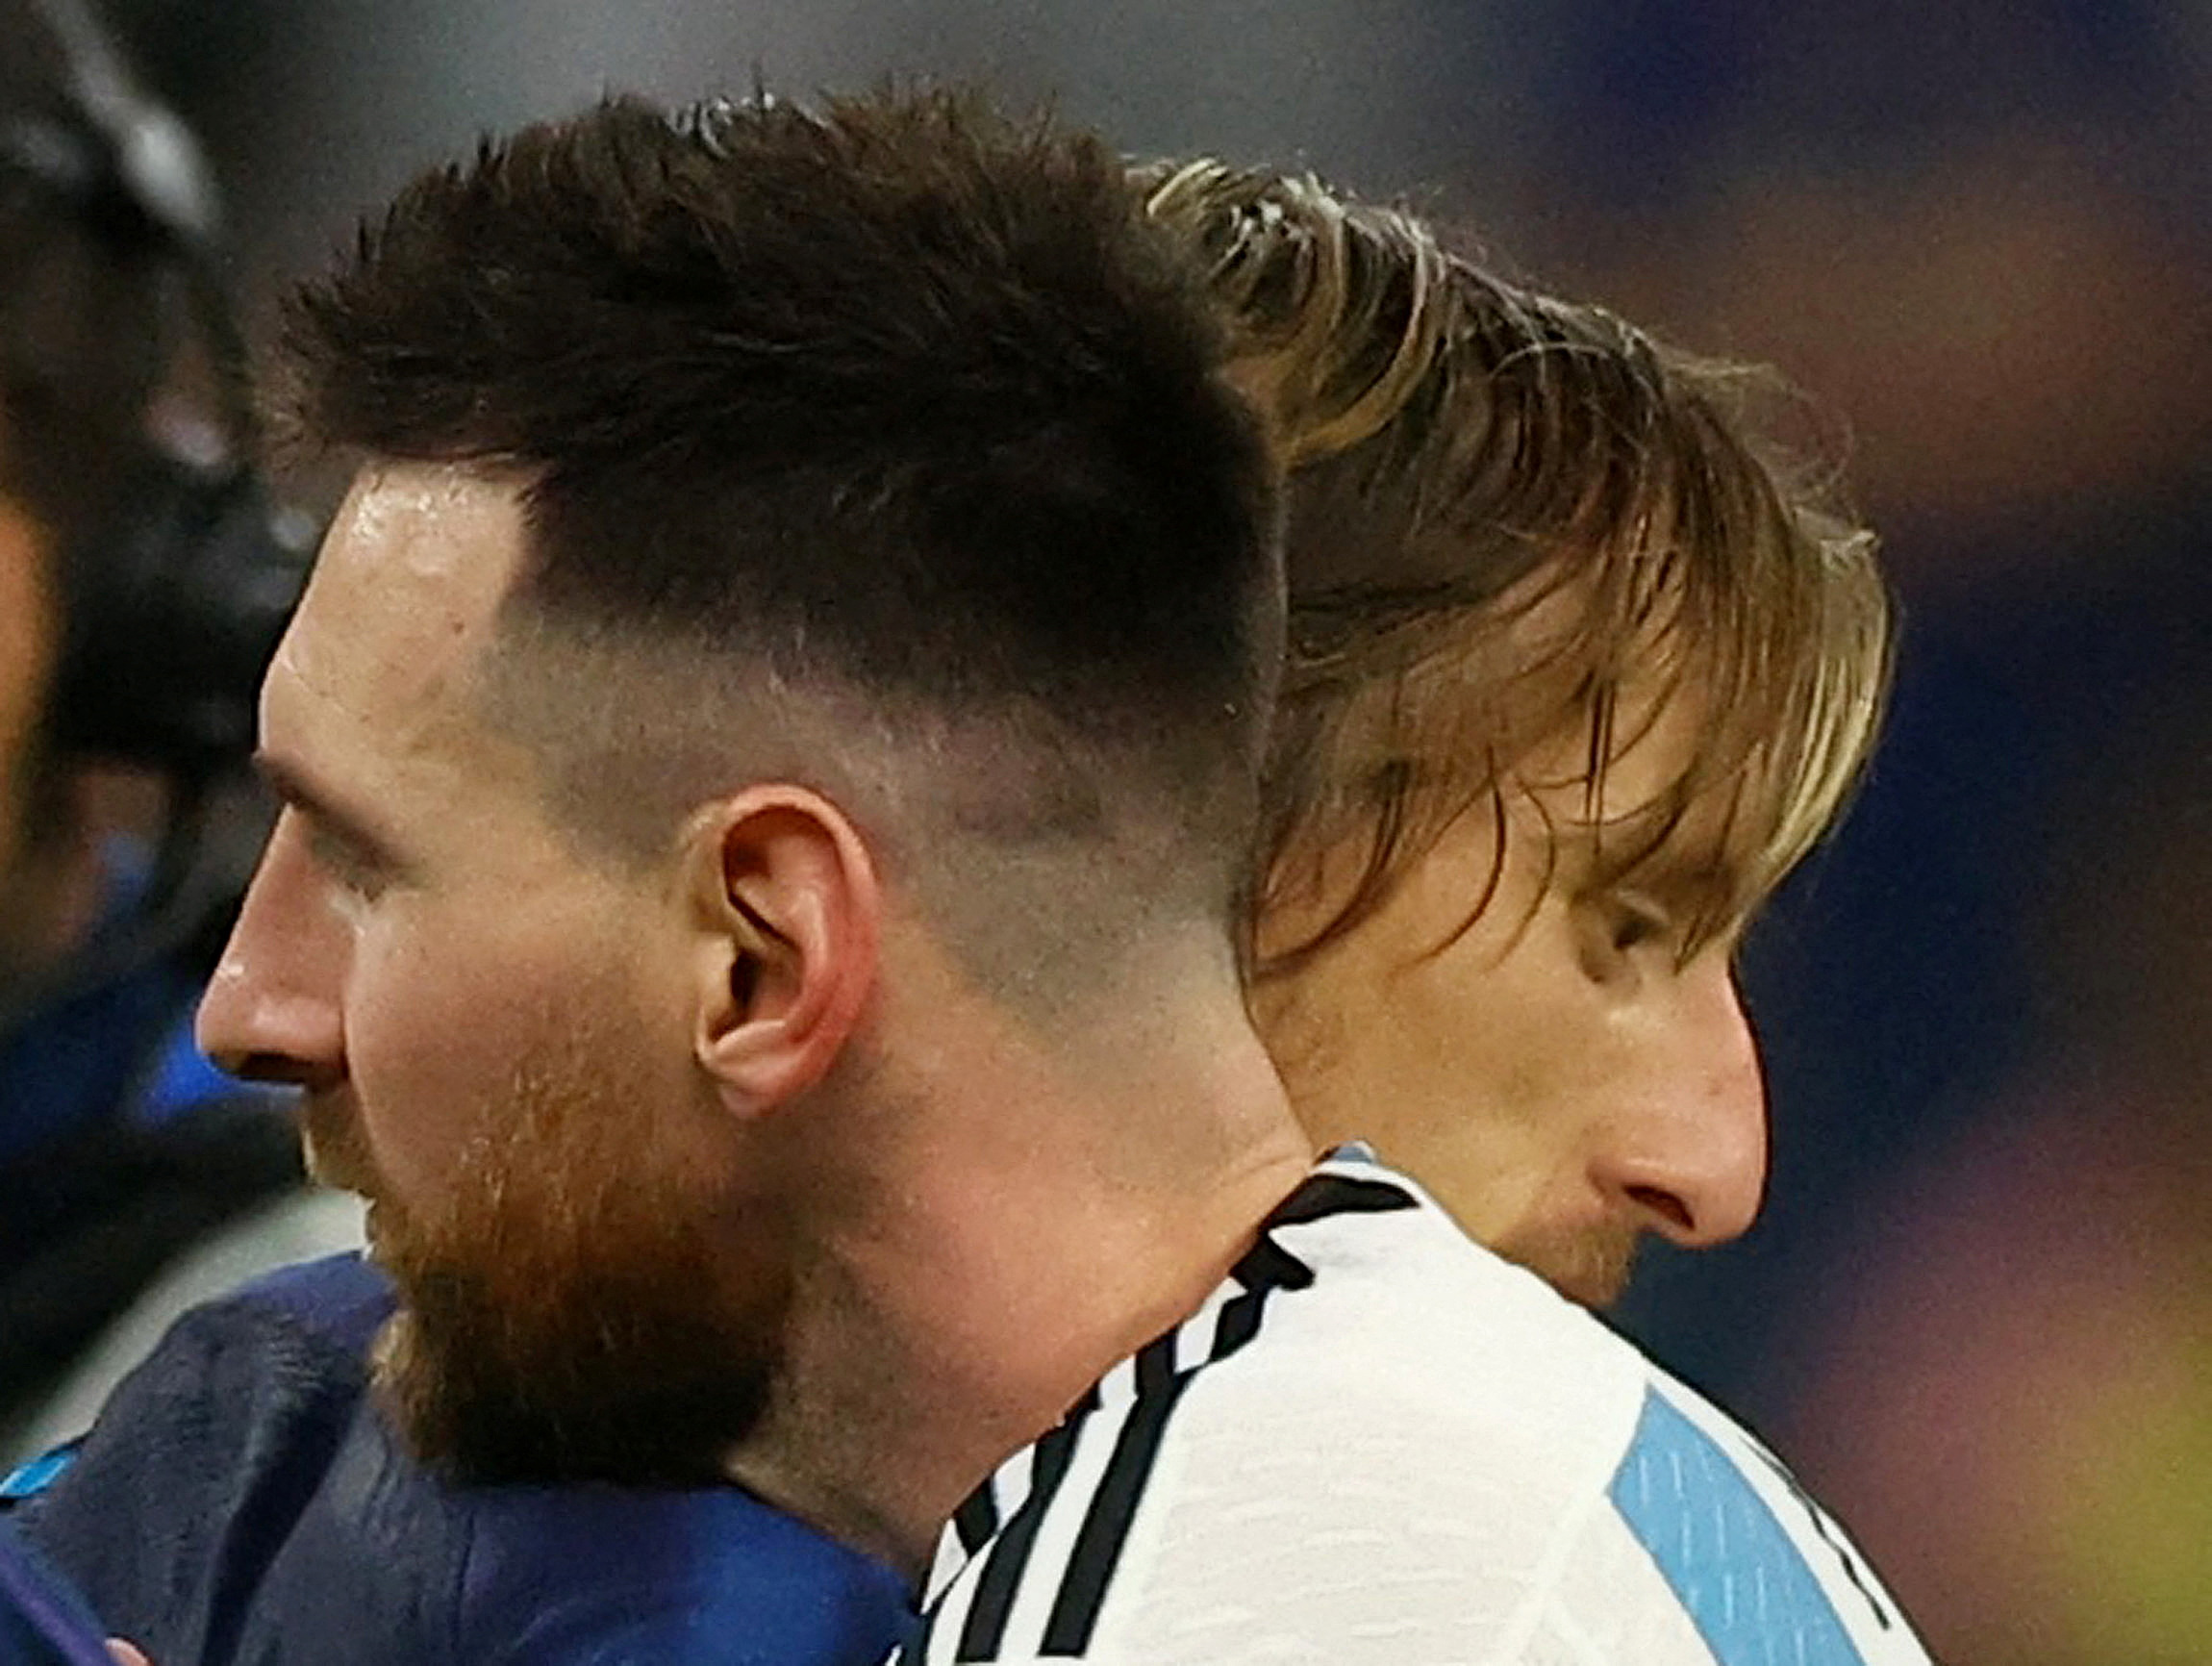 Greetings from Lionel Messi and Luka Modric